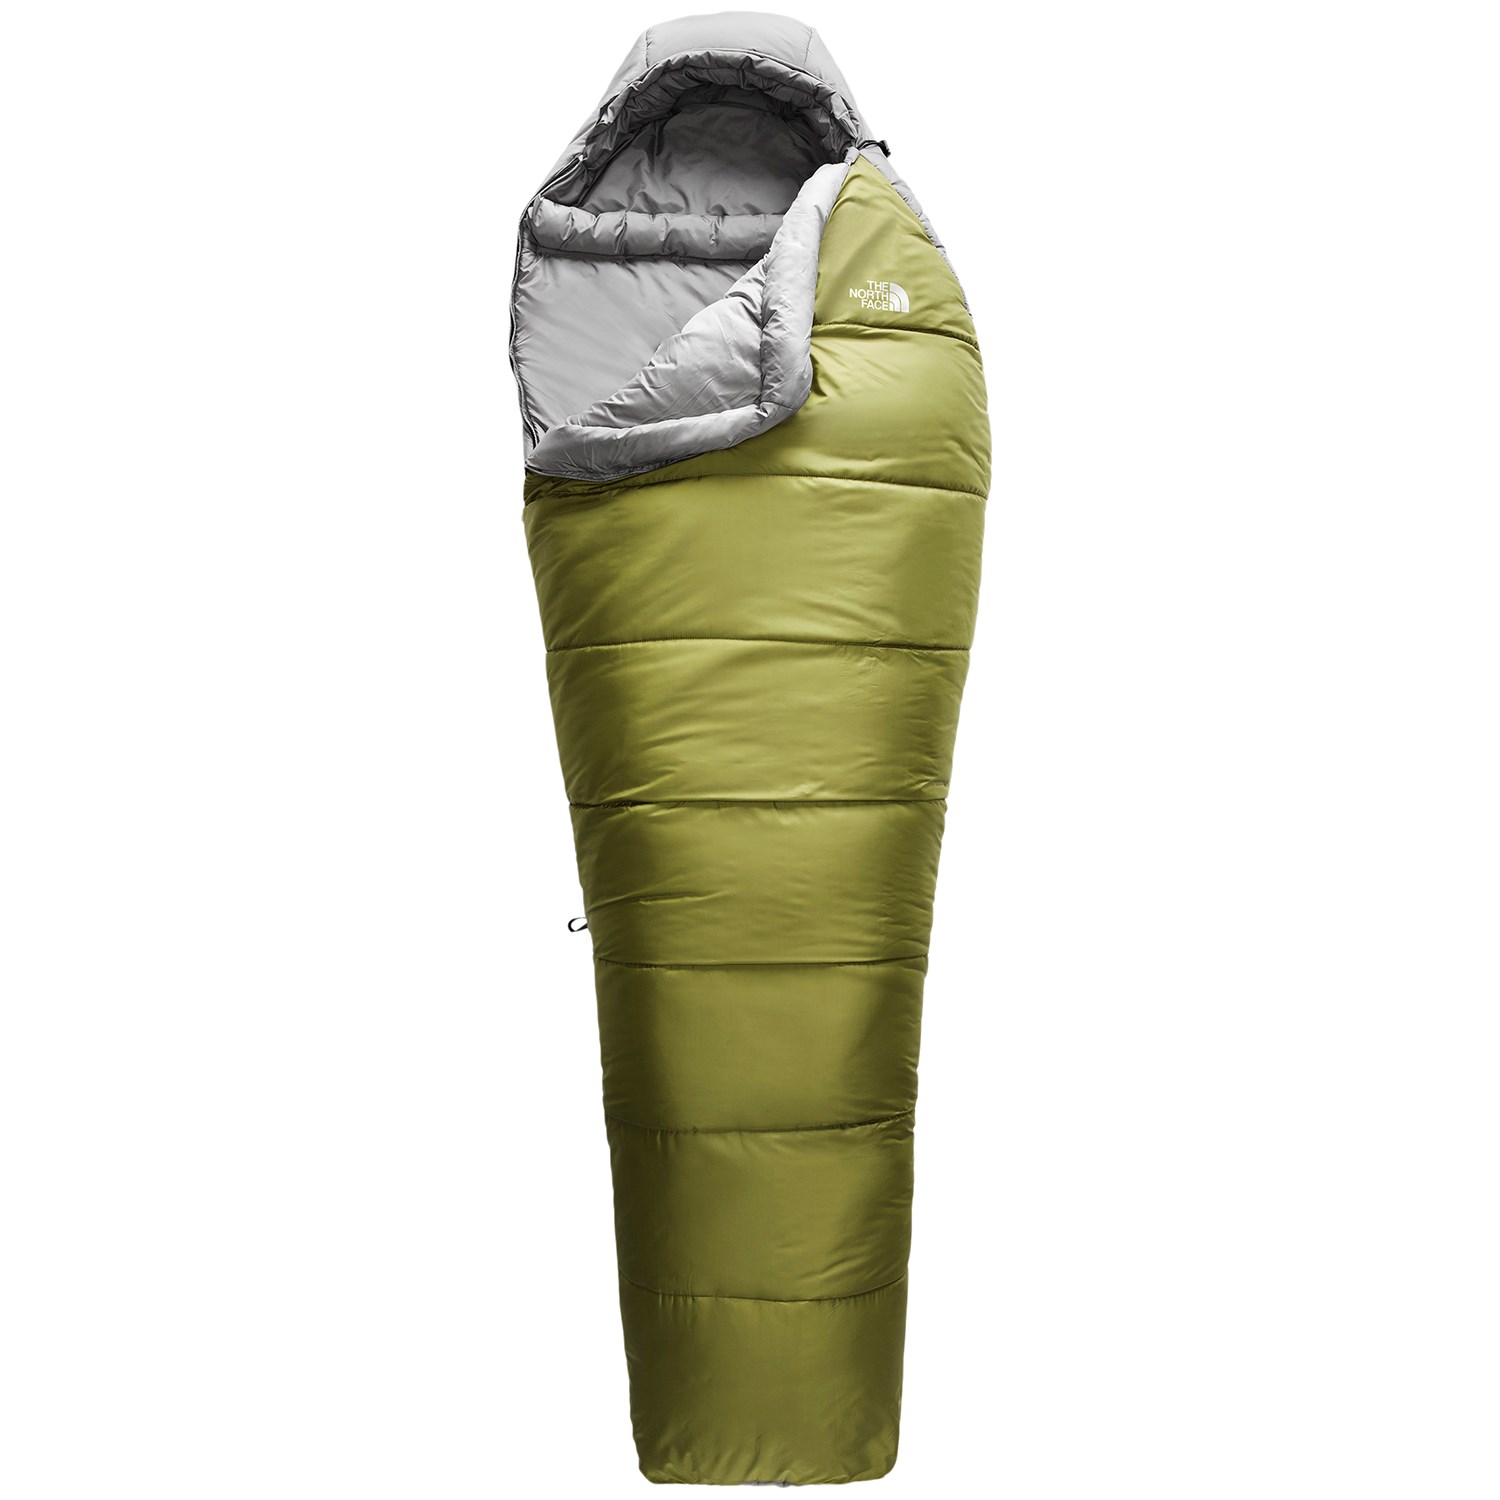 north face wasatch 55